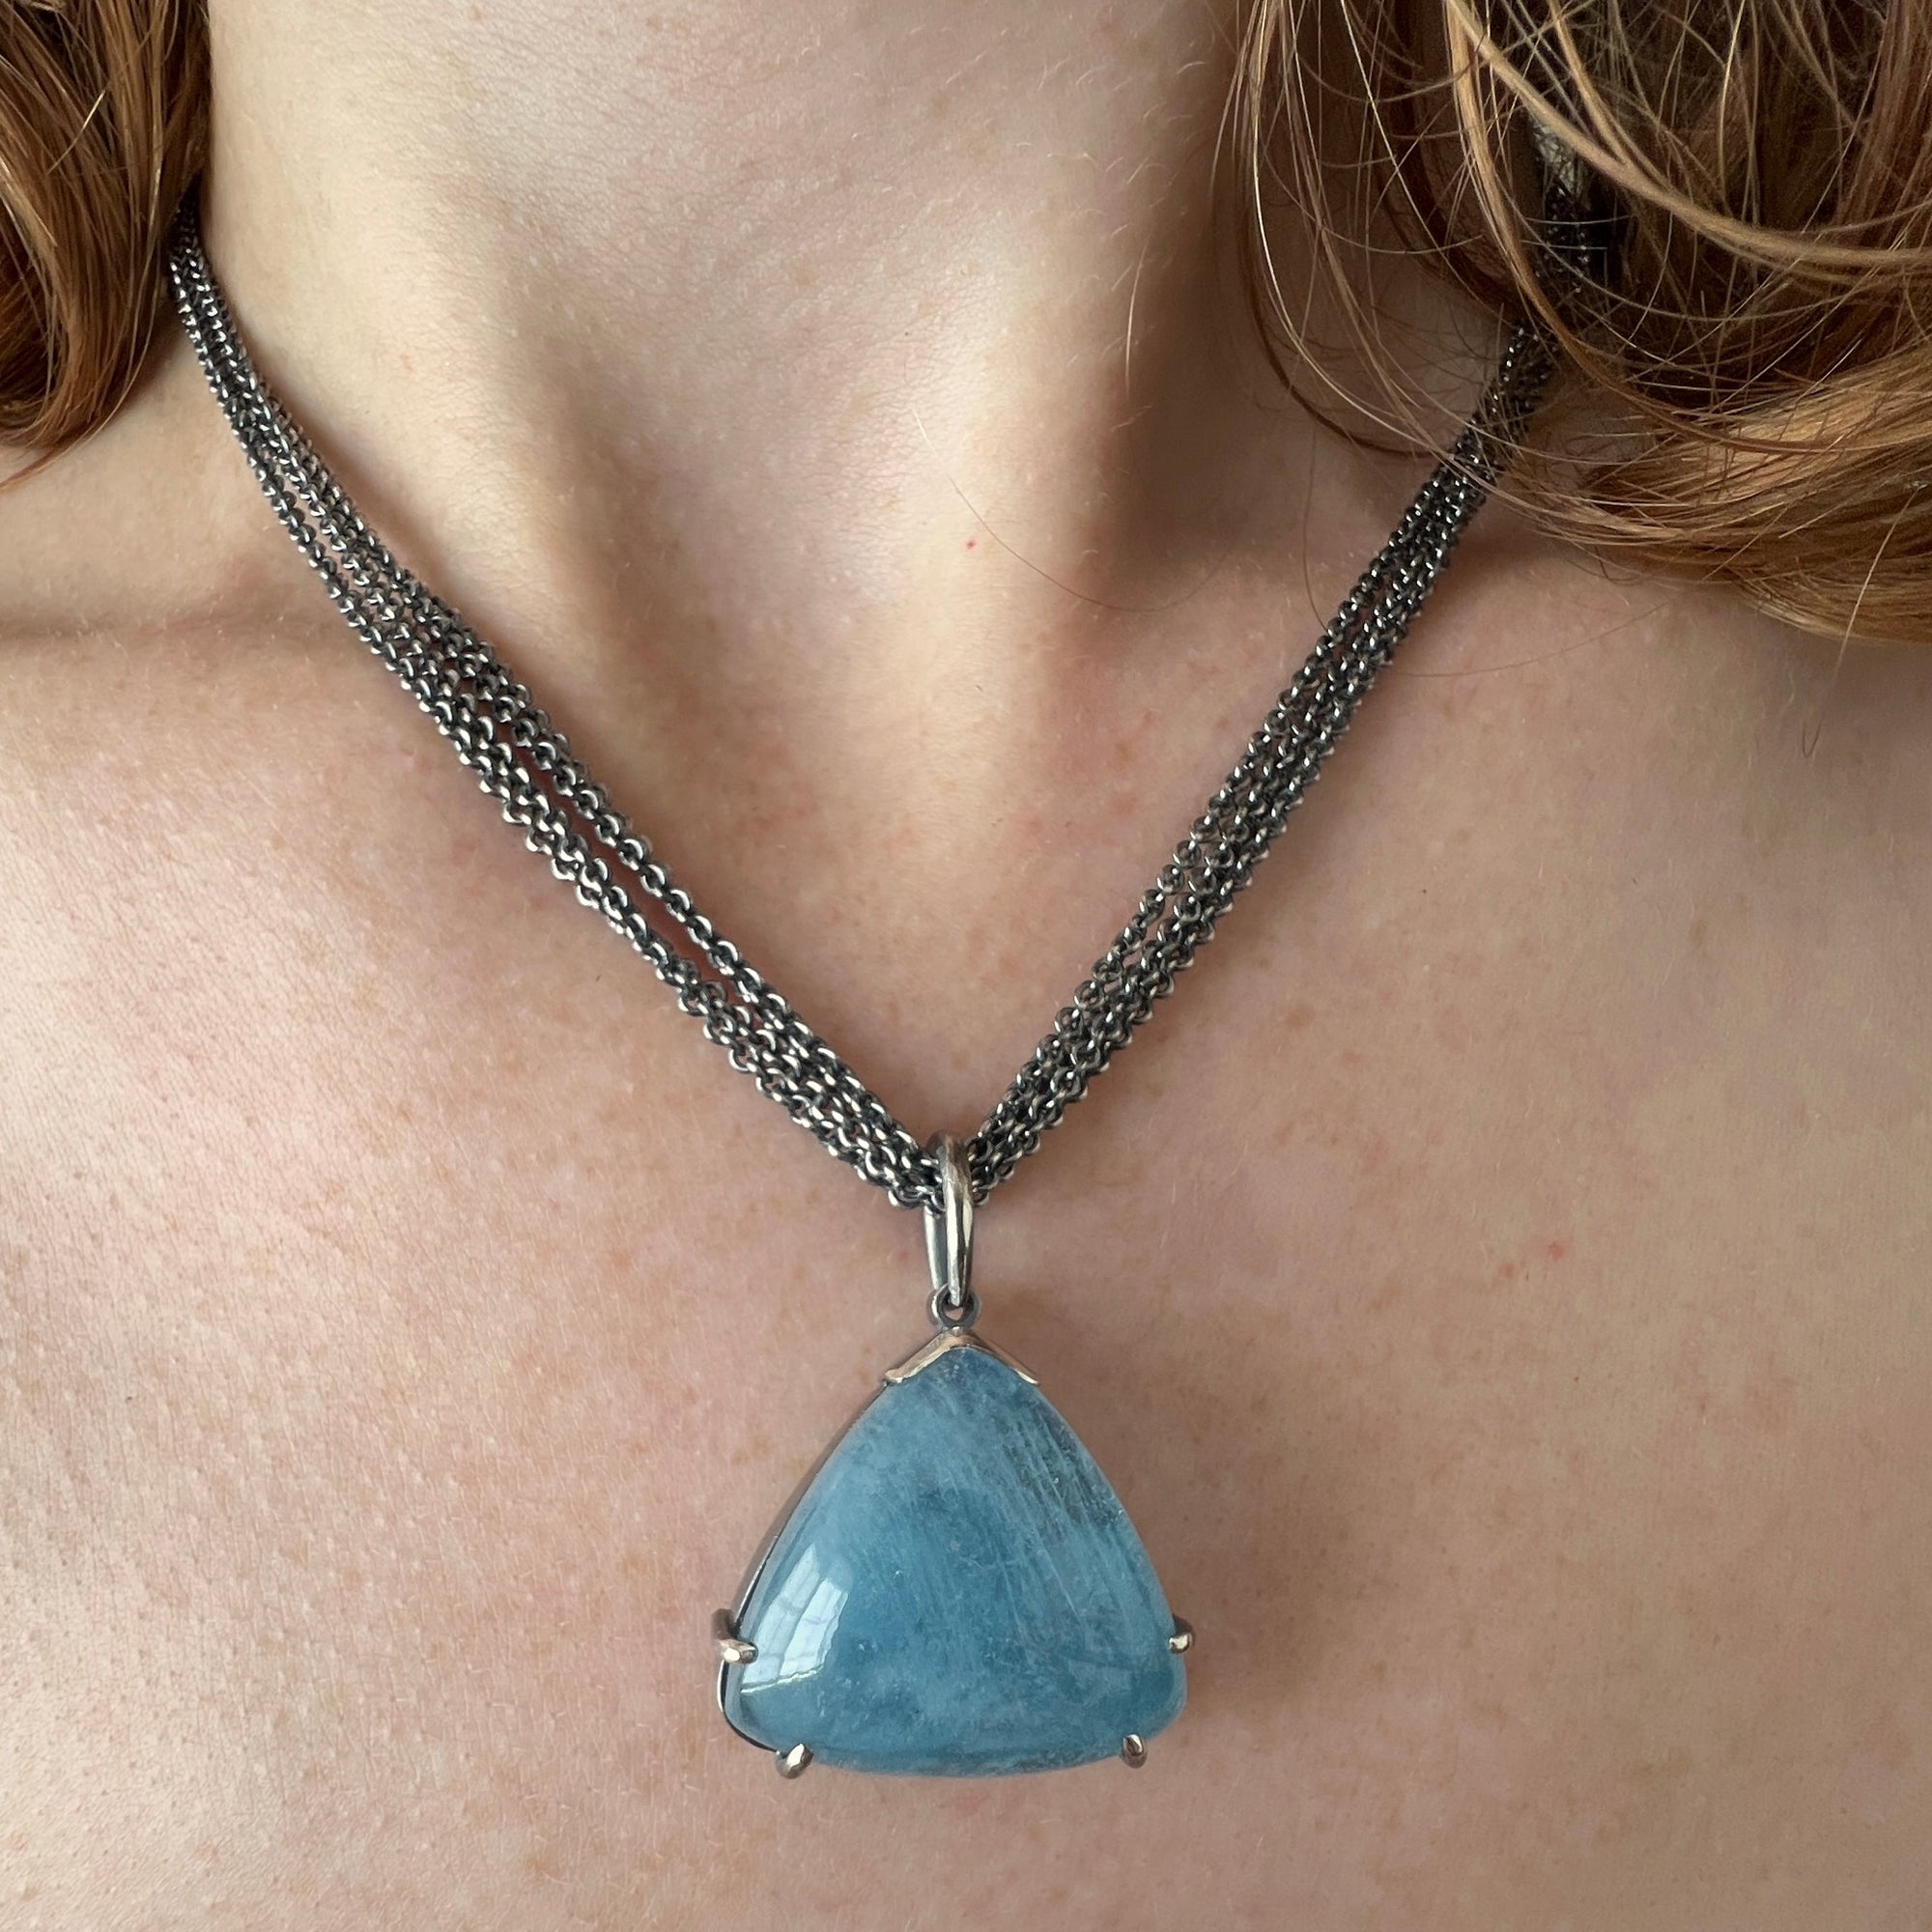 Necklace with large triangular aquamarine cabachon on multi sterling chain shown on model made by Ayesha Mayadas